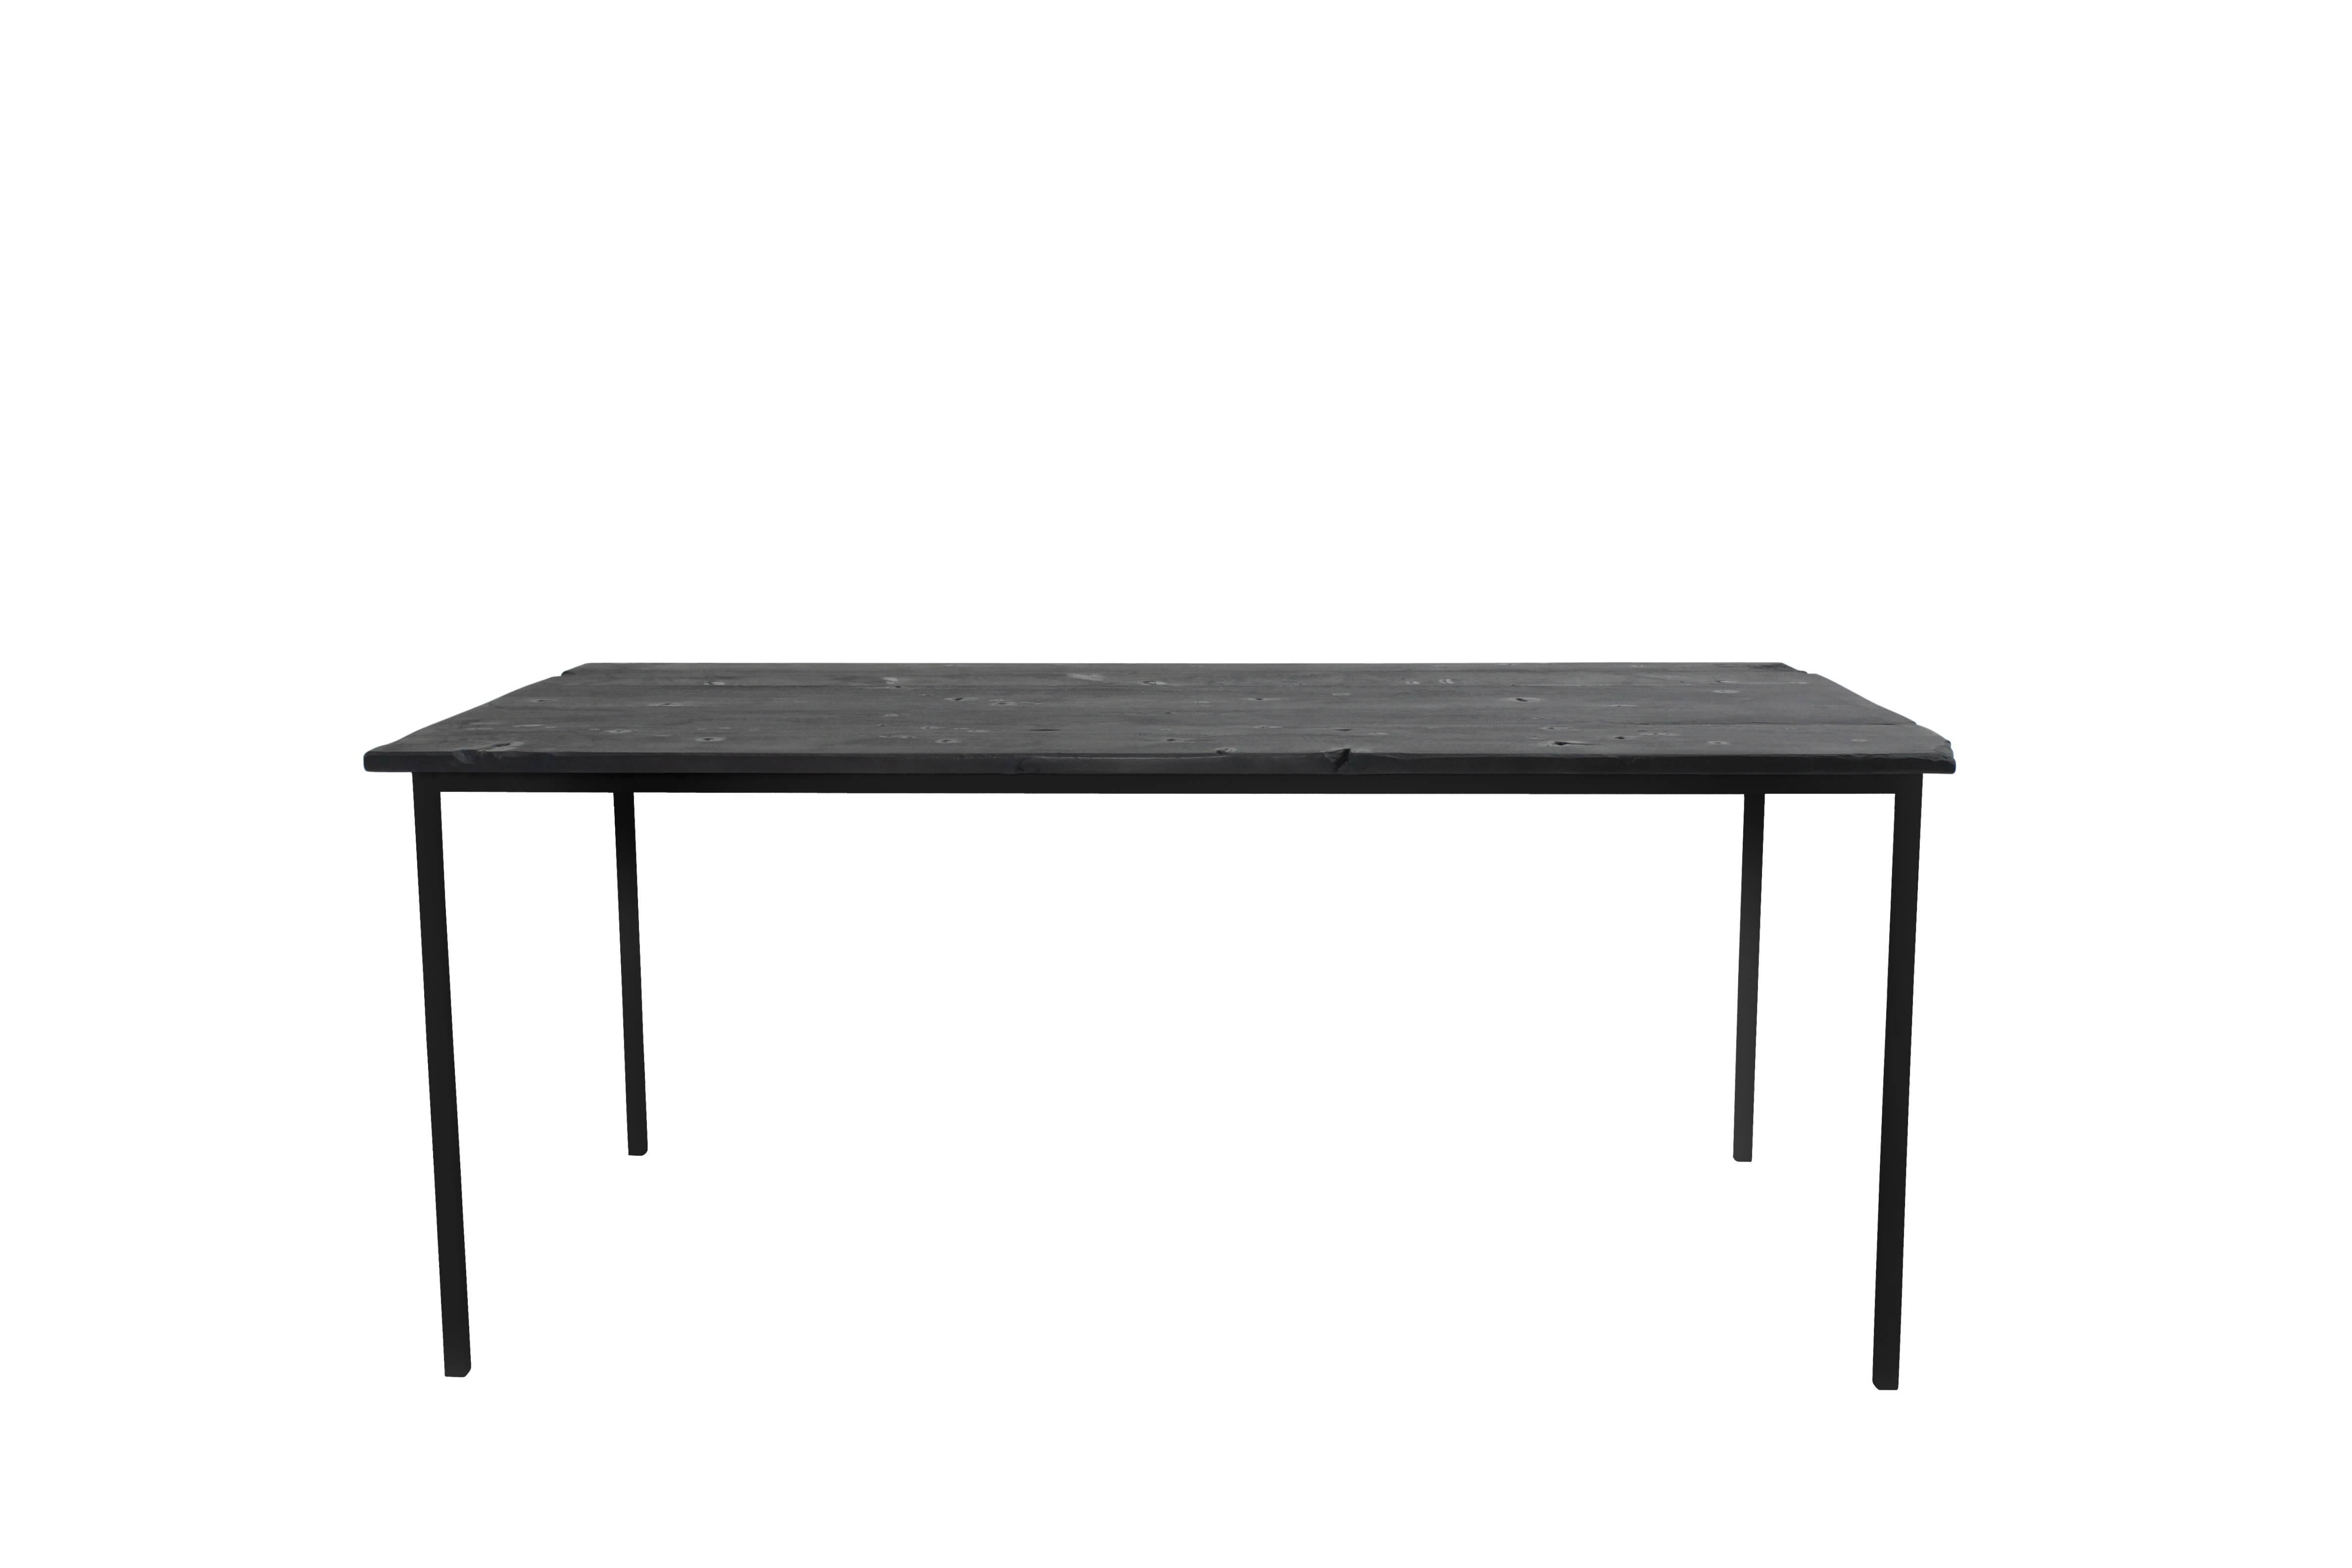 "Hephaestus' Charred Table" is a simple, elegant and modern dining that features a top made from historic decommissioned NYC water tower wood which has been torched and sealed with oil to attain its rich dark texture. The base is welded